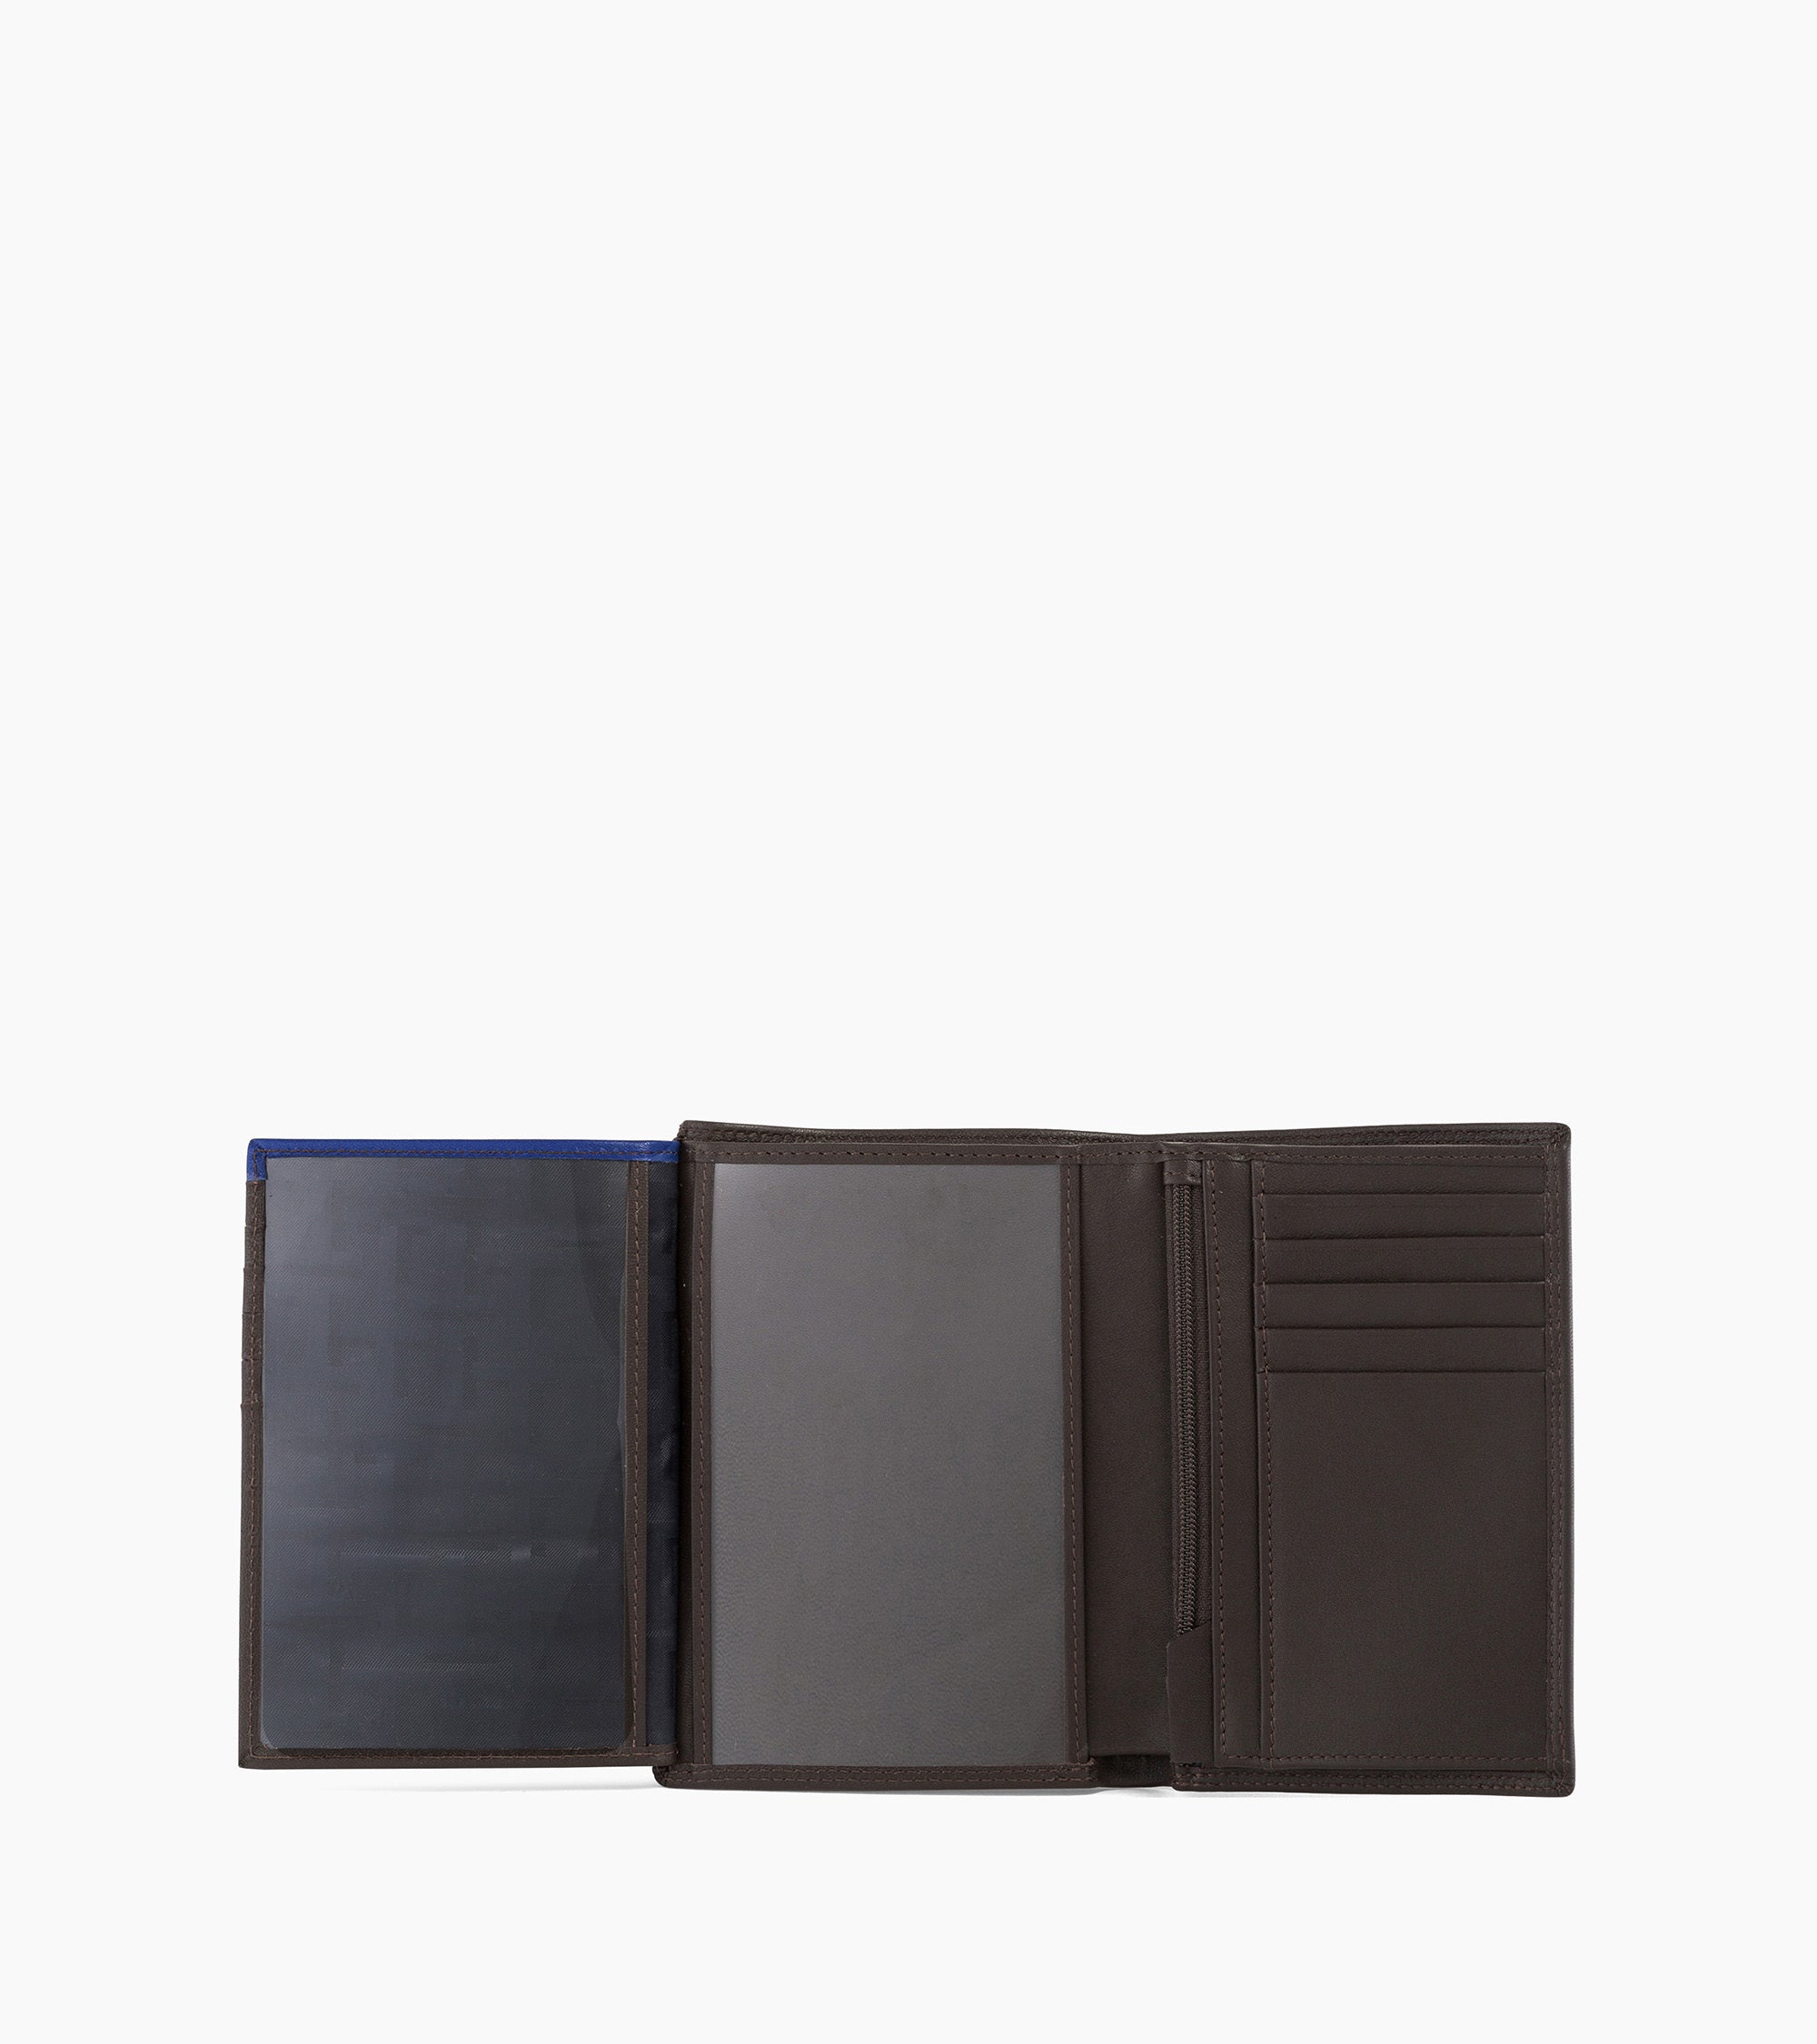 Zipped pocket and 2 shutters Martin smooth leather wallet